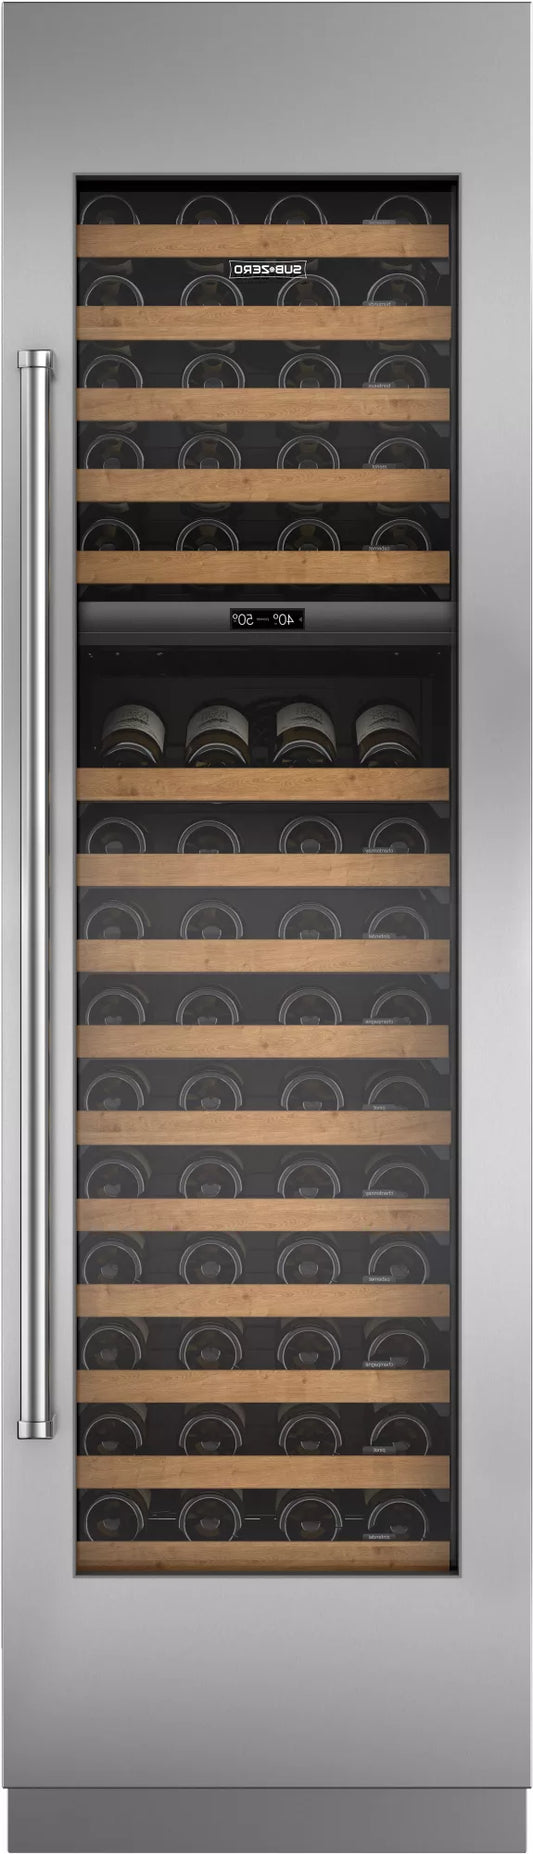 Sub-Zero  IW24RH 24 Inch Smart Wine Storage with 102-Bottle Capacity, 15 Cherrywood-Faced Shelves, Dual Temperature Zones, Star-K Certified Sabbath Mode and Digital Touch Sensor Control Panel: Right Hinge Door Swing , 369448